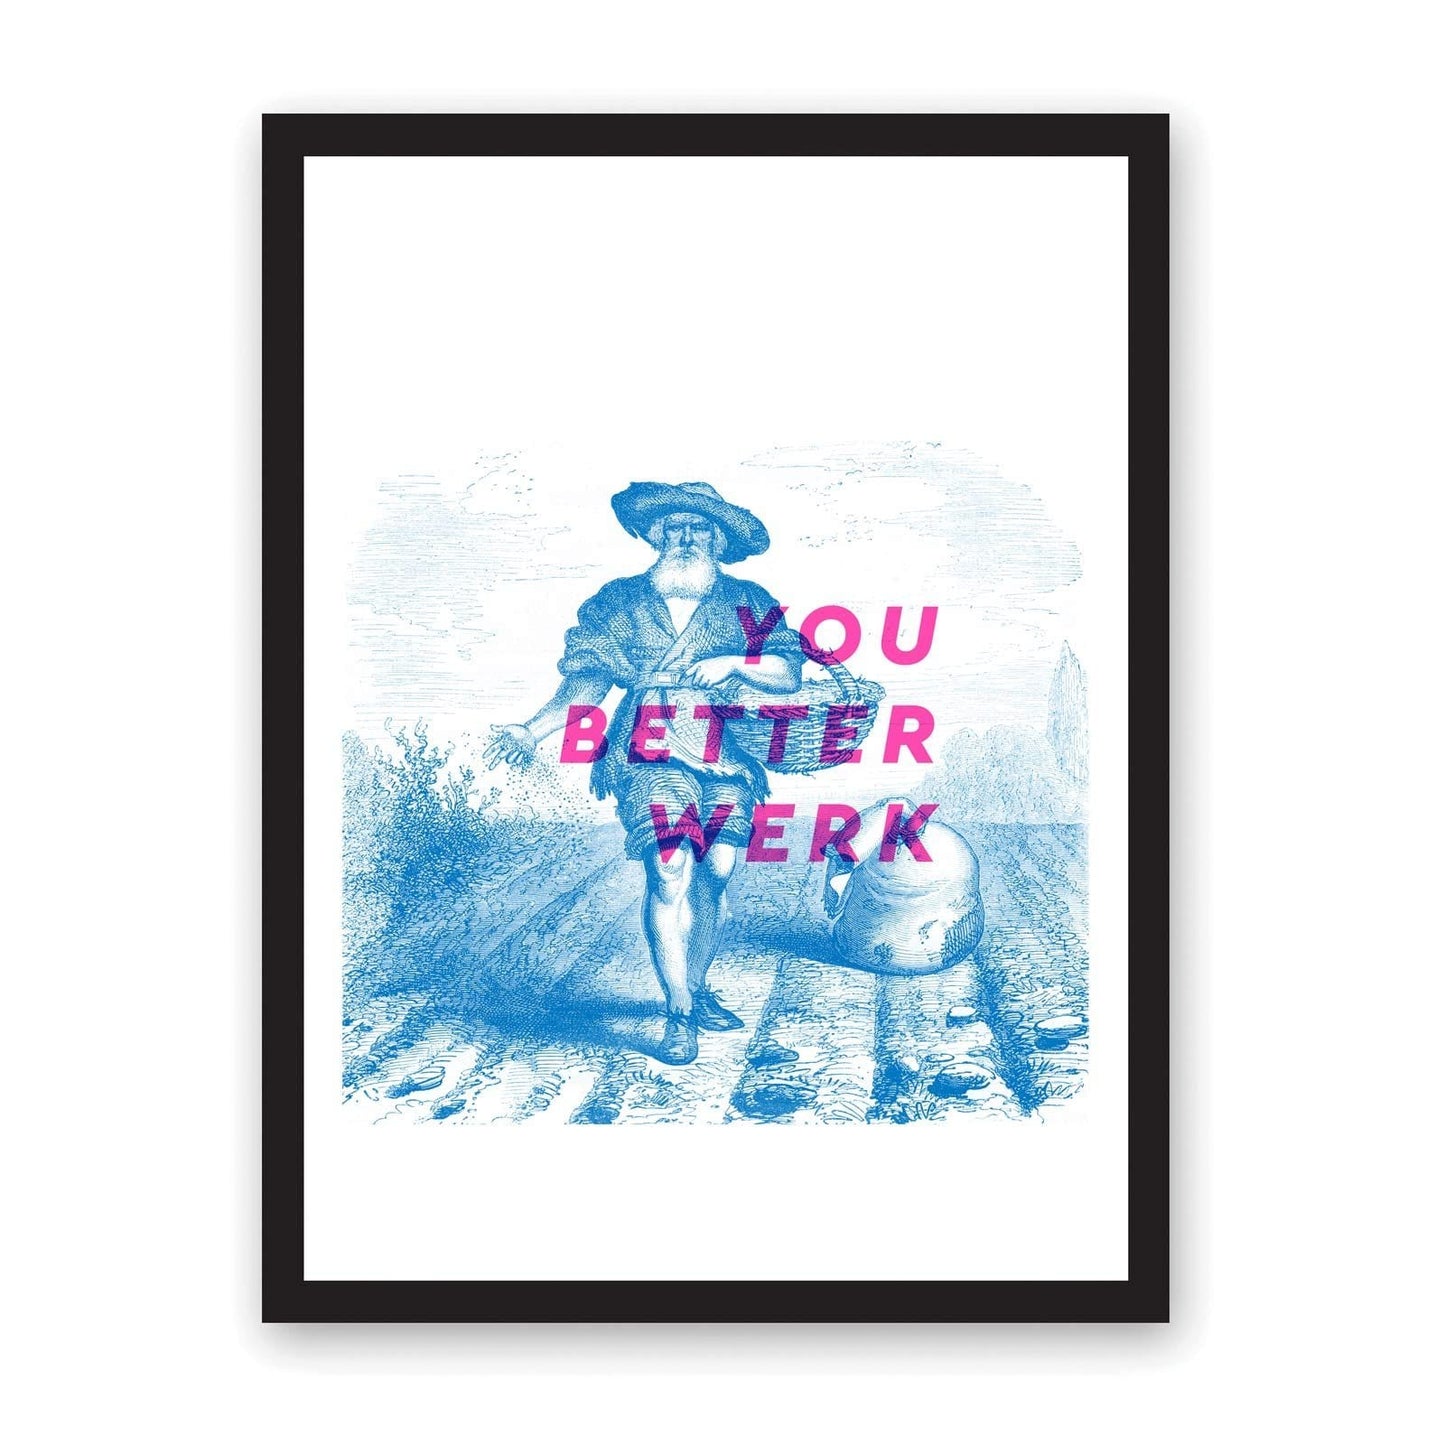 White paper with blue illustrated man in field, with wording You Better Werk pink semi-transparent working in capital letters 